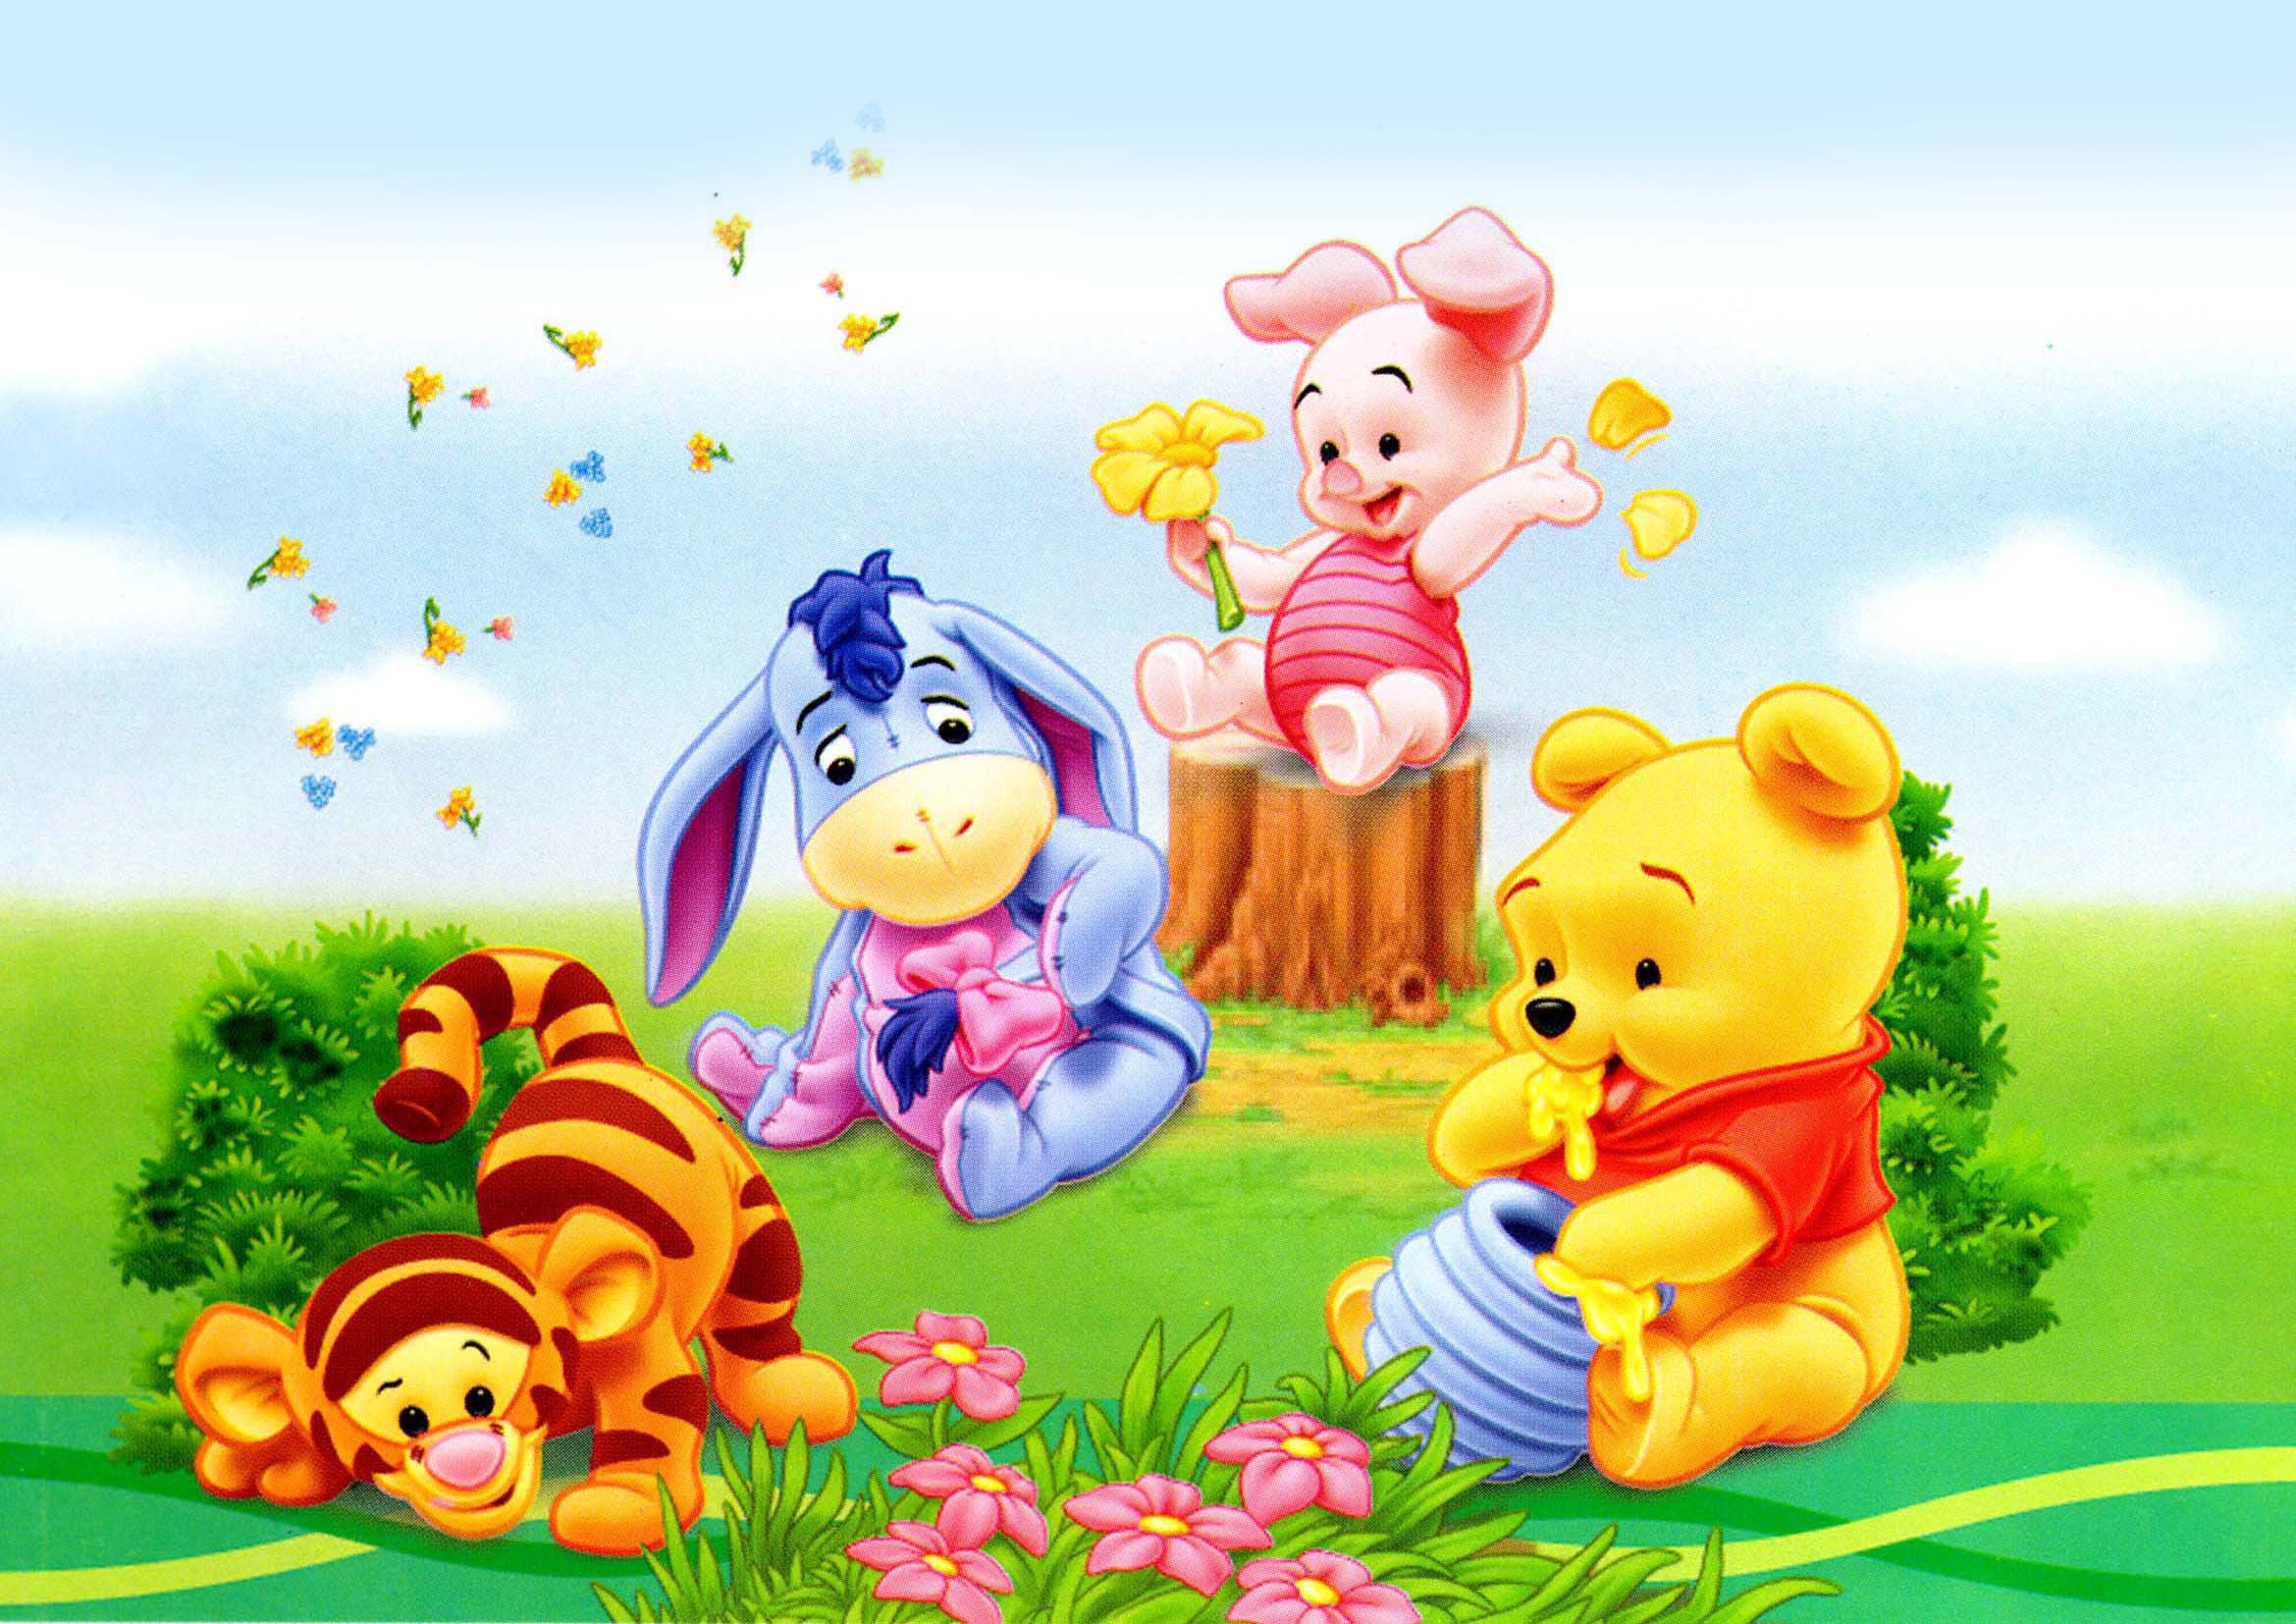 Winnie The Pooh Background Wallpaper Win10 Themes